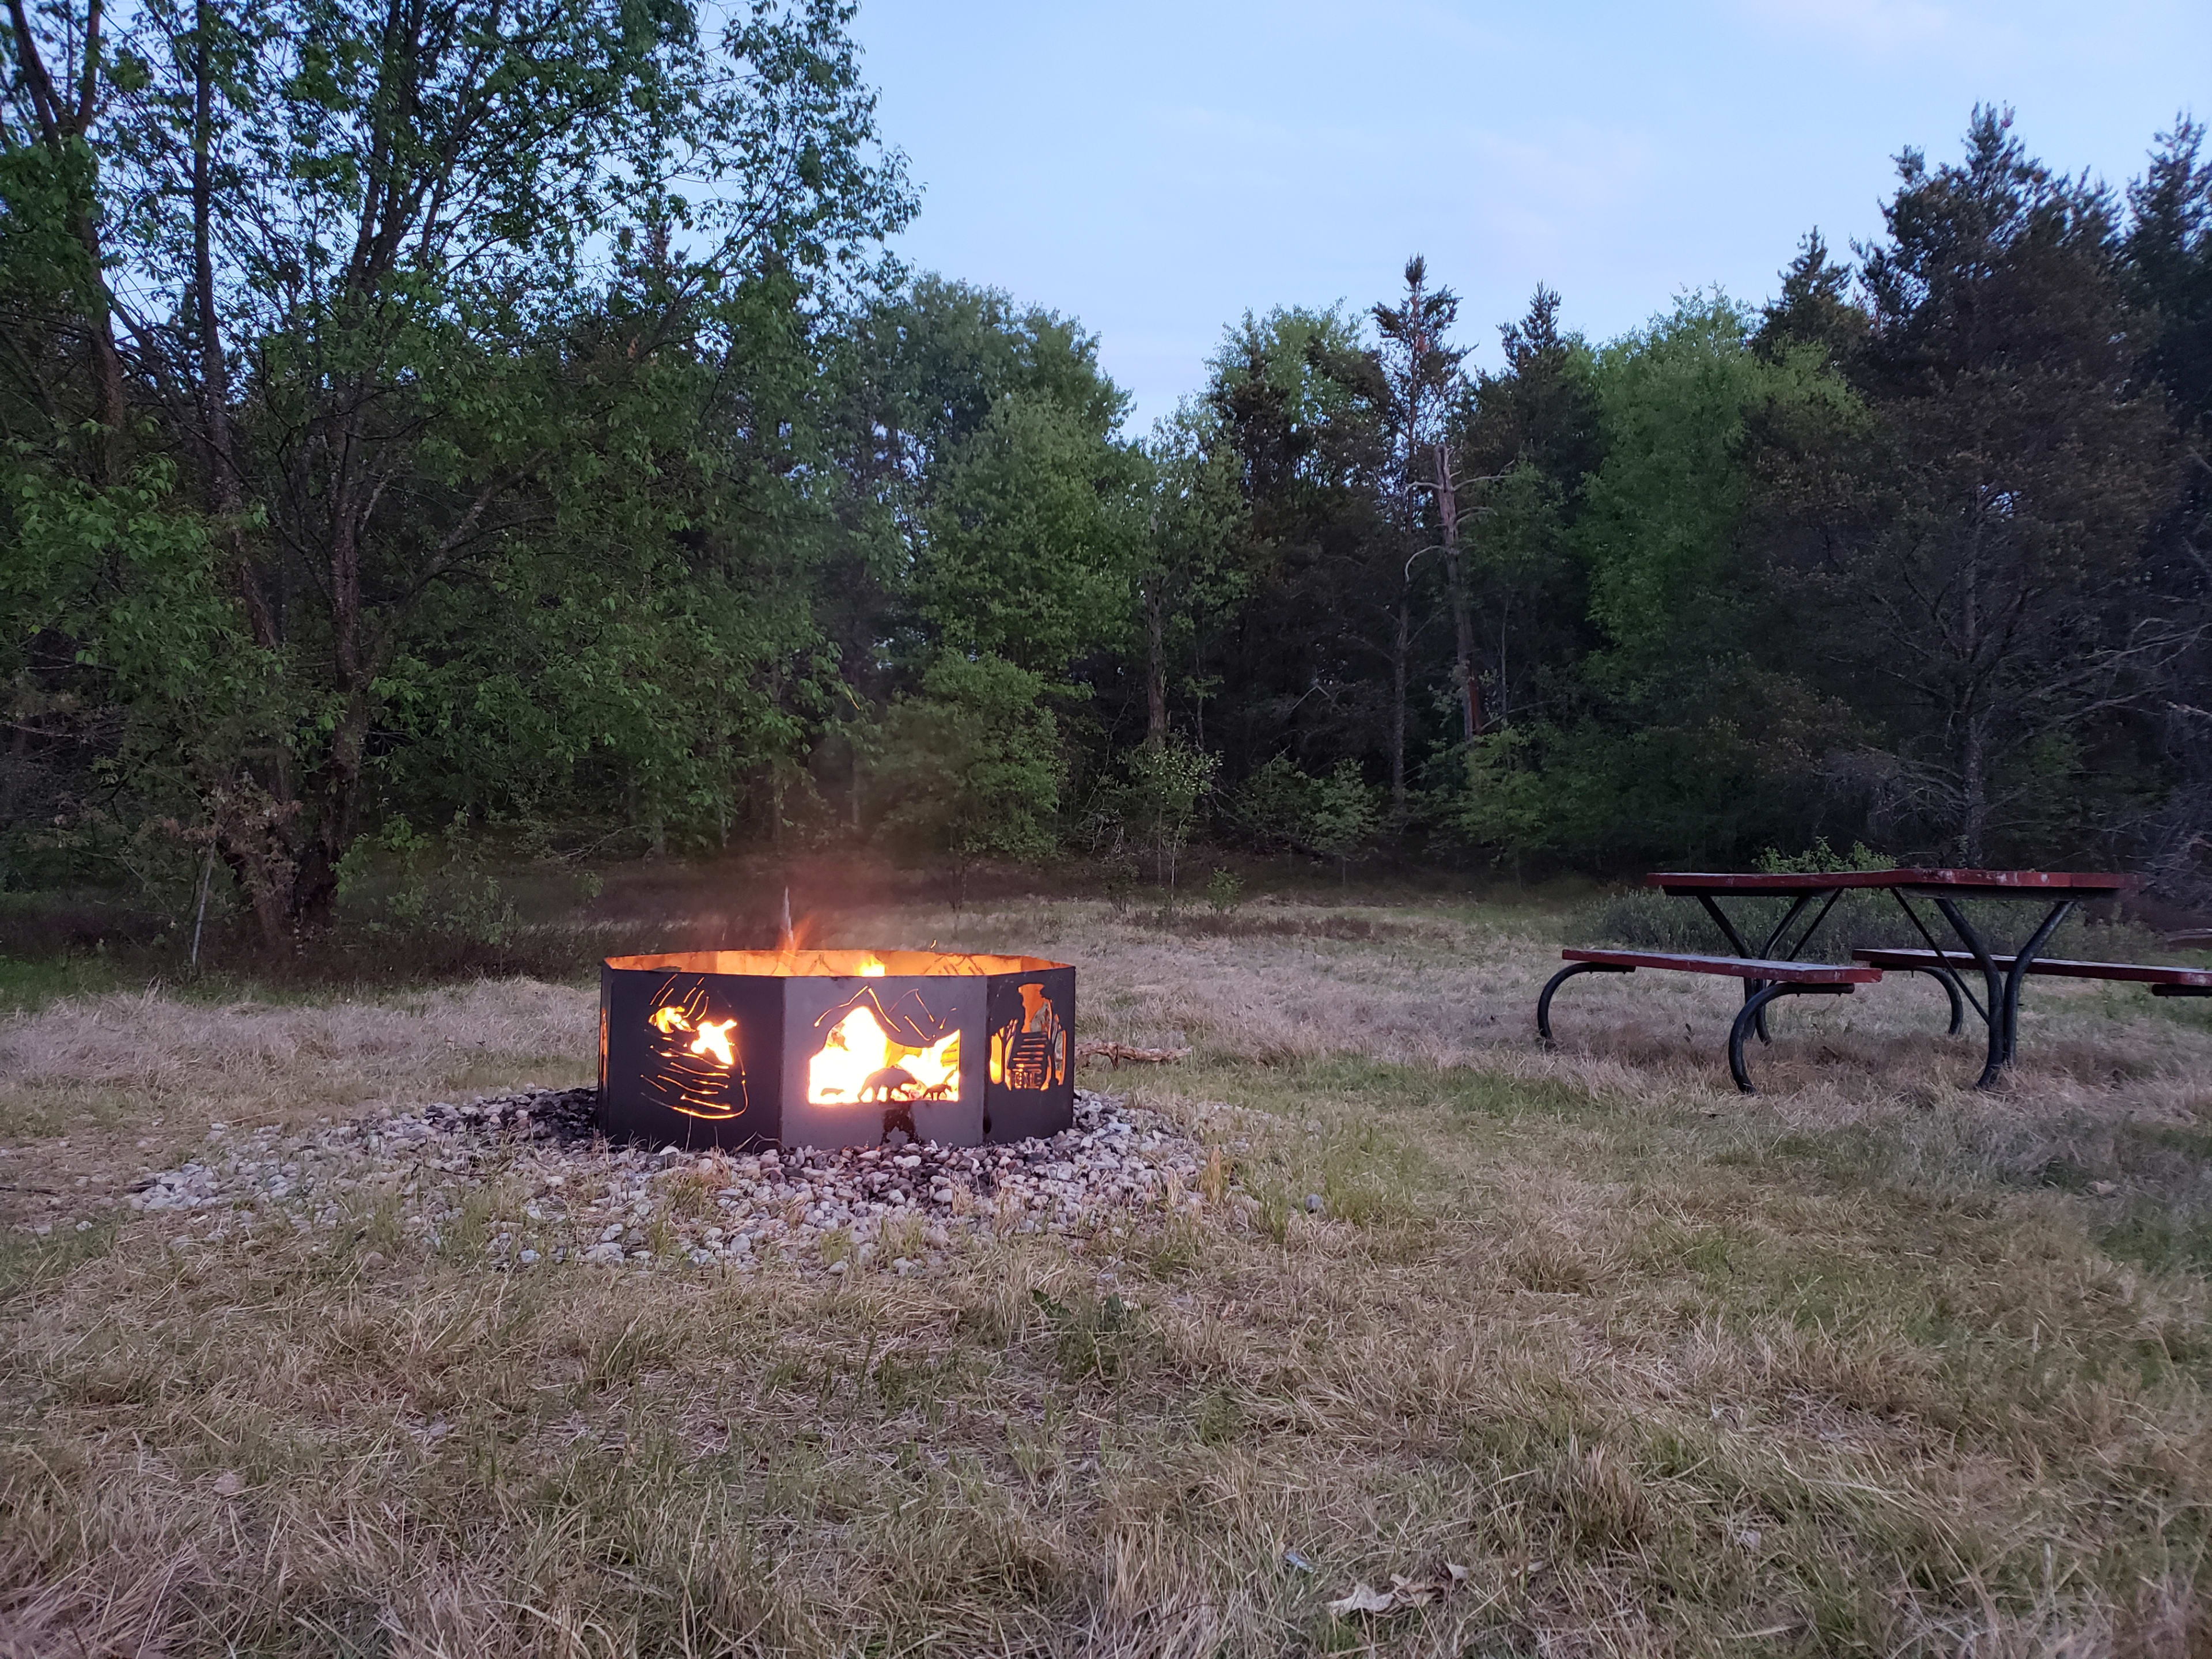 Steel Fire Ring and site picnic table